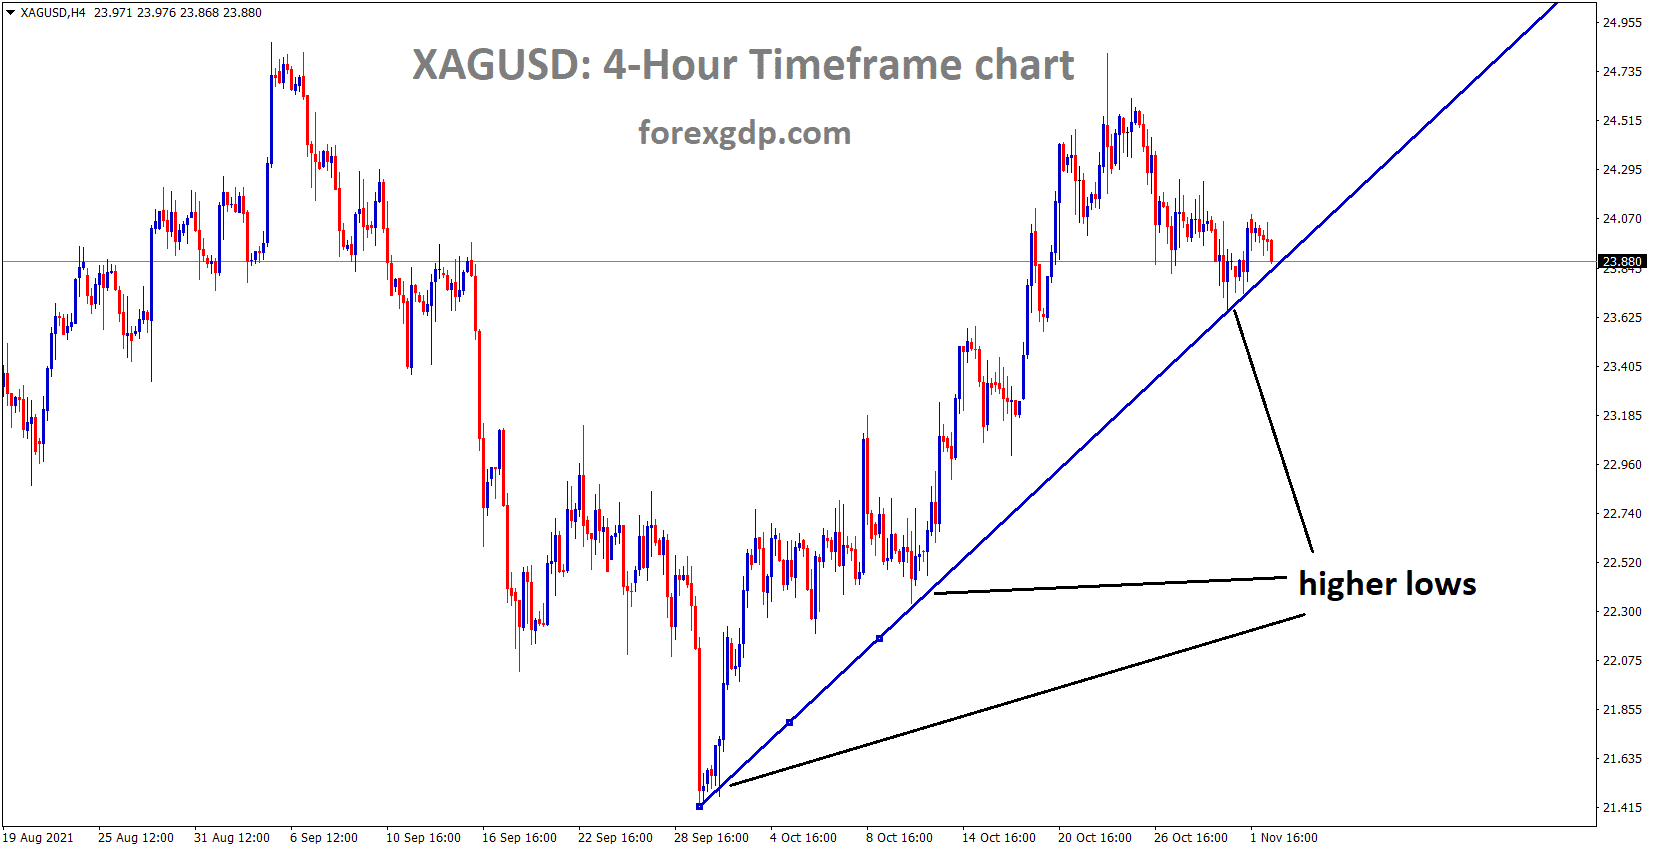 XAGUSD Silver prices are moving at the Bullish trendline and prices stand at the higher low area of the Trendline.